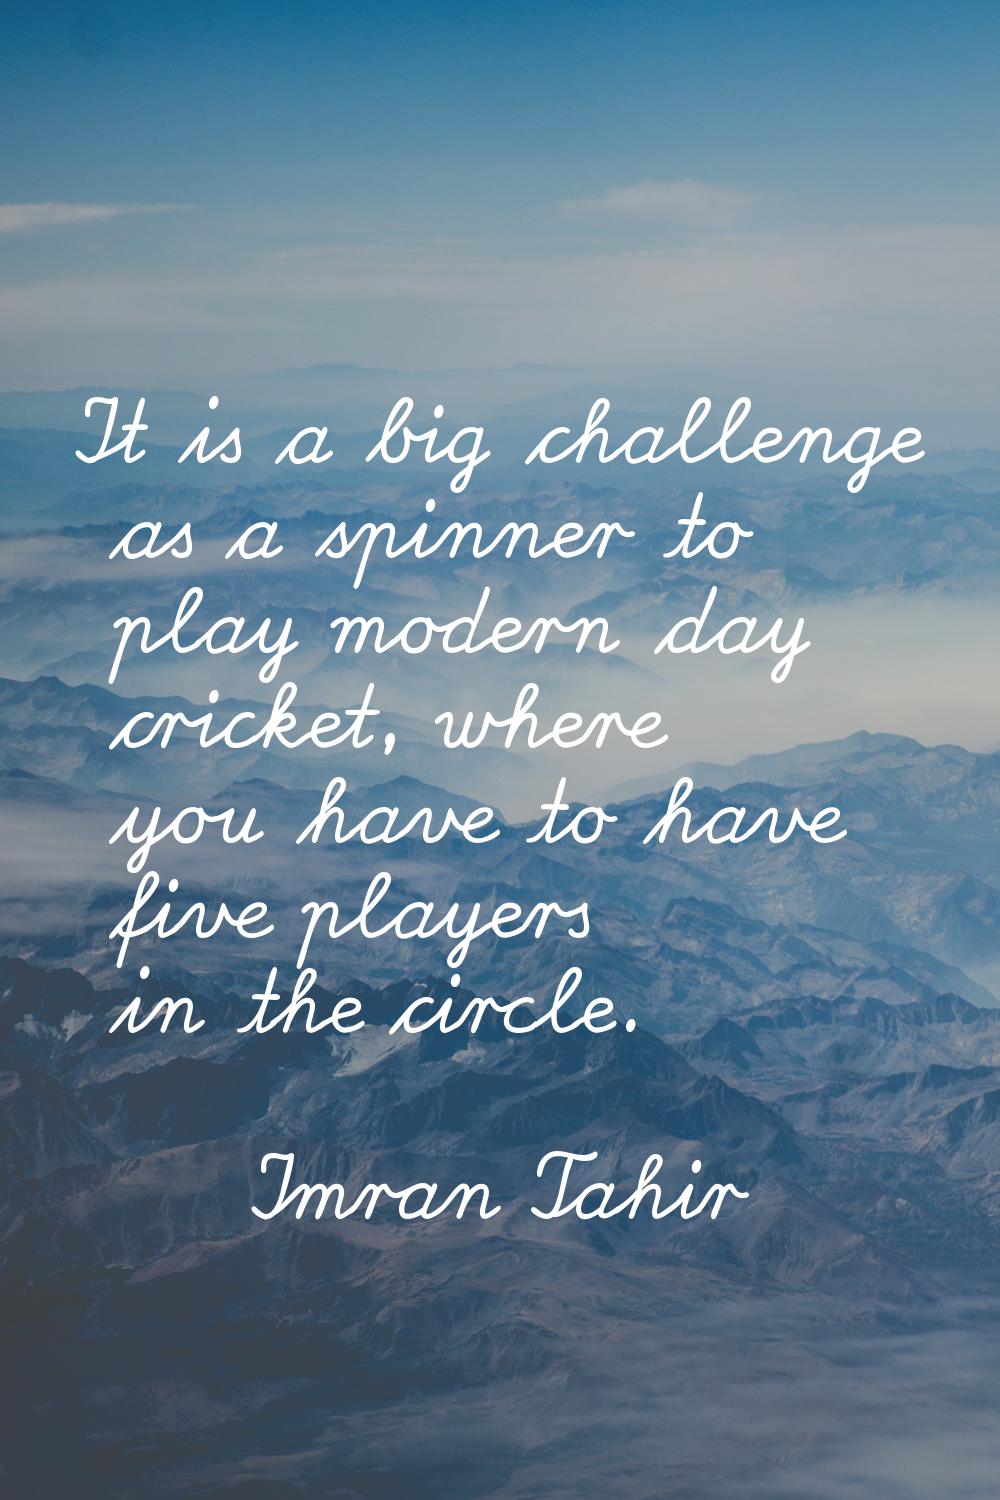 It is a big challenge as a spinner to play modern day cricket, where you have to have five players 